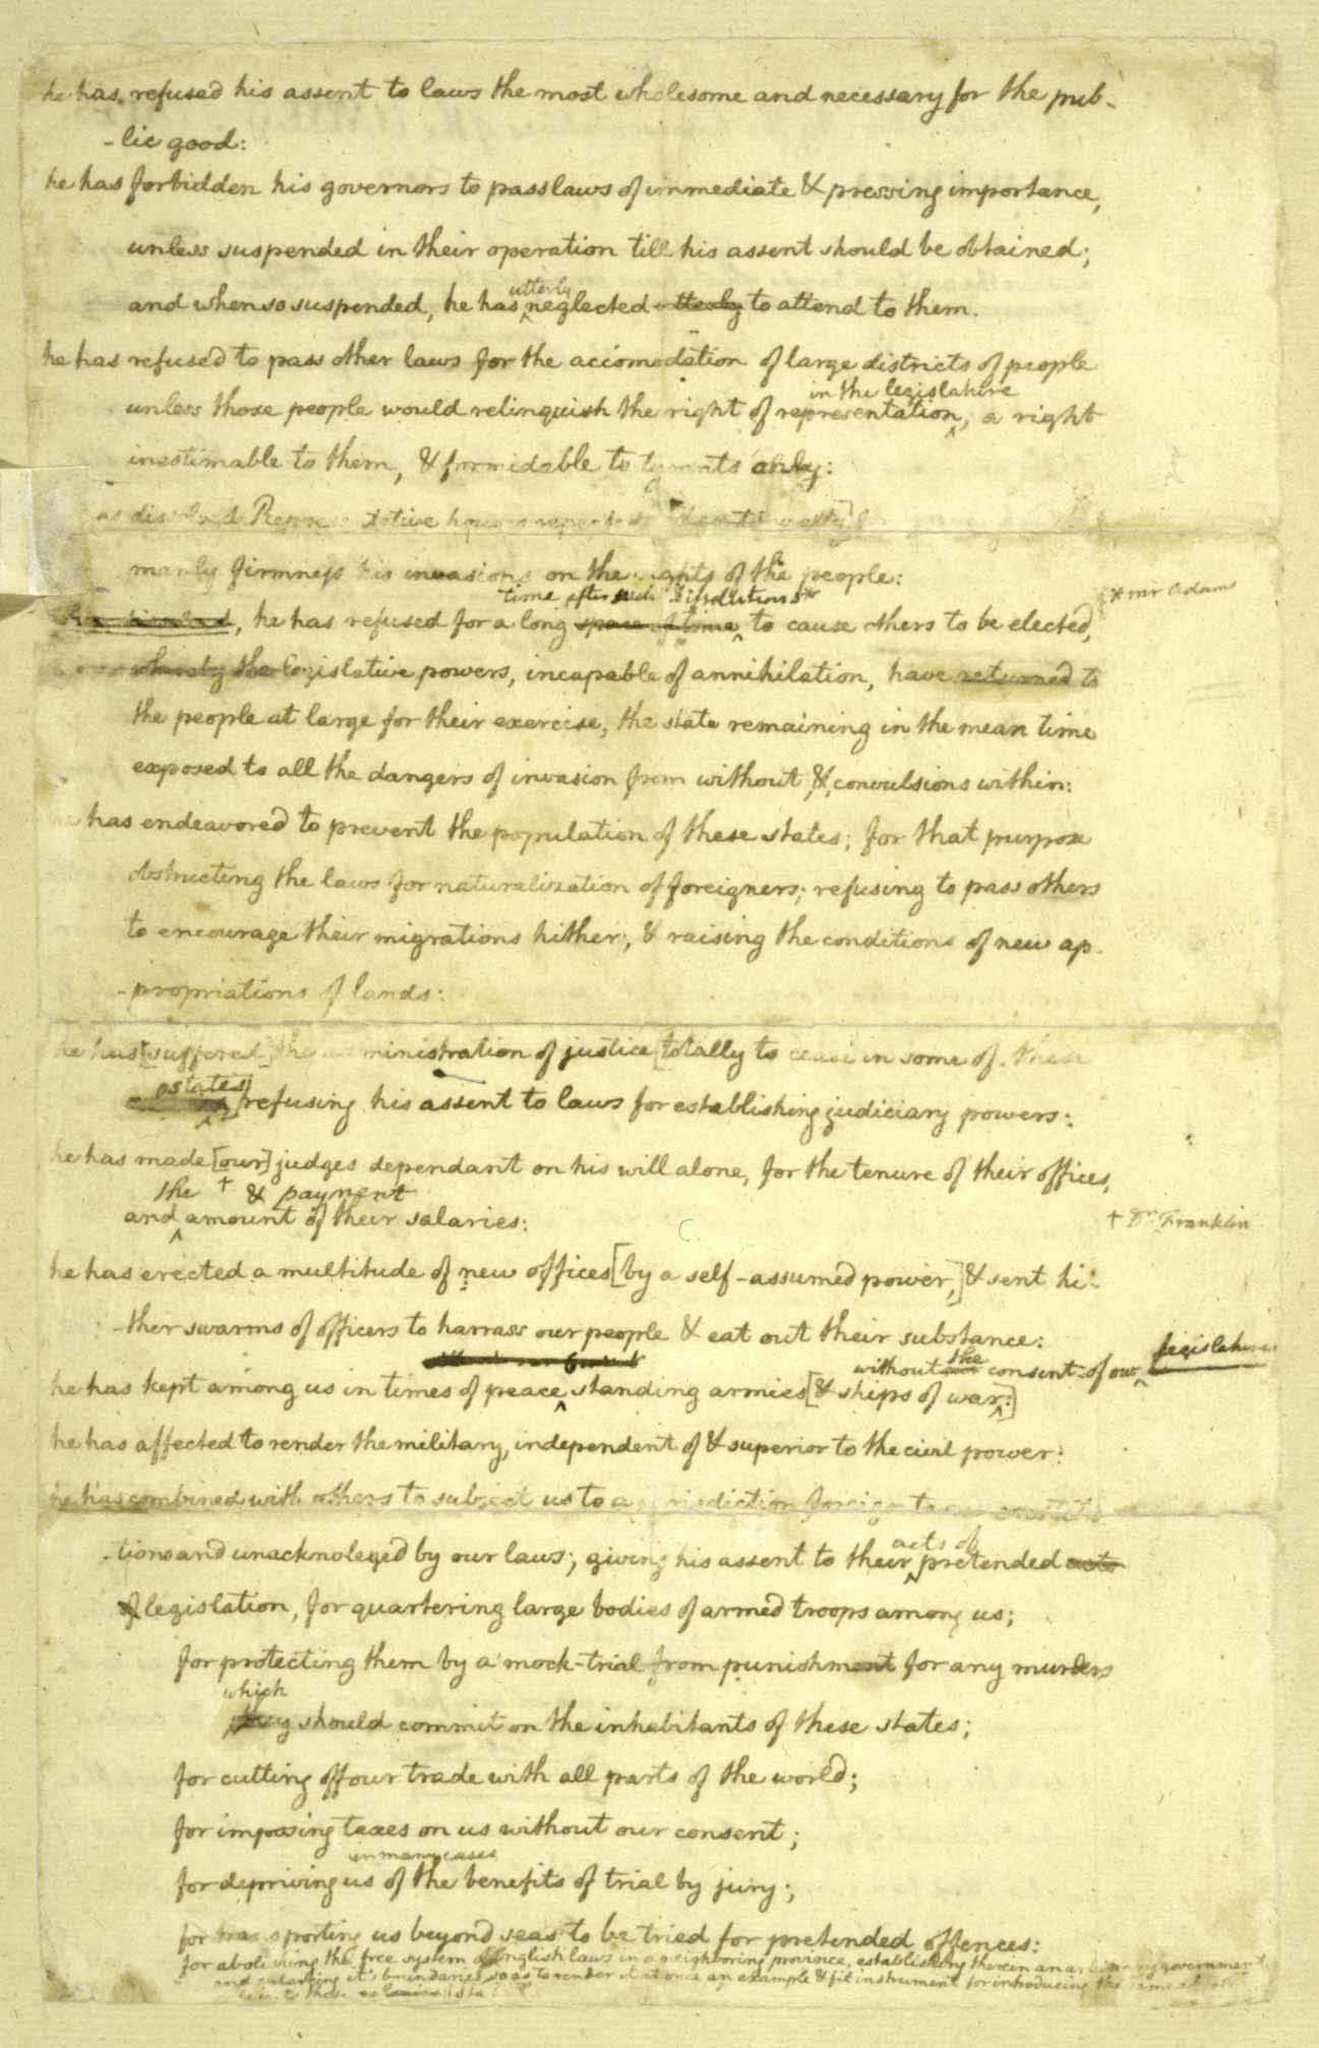 Image of page of Declaration of Independence